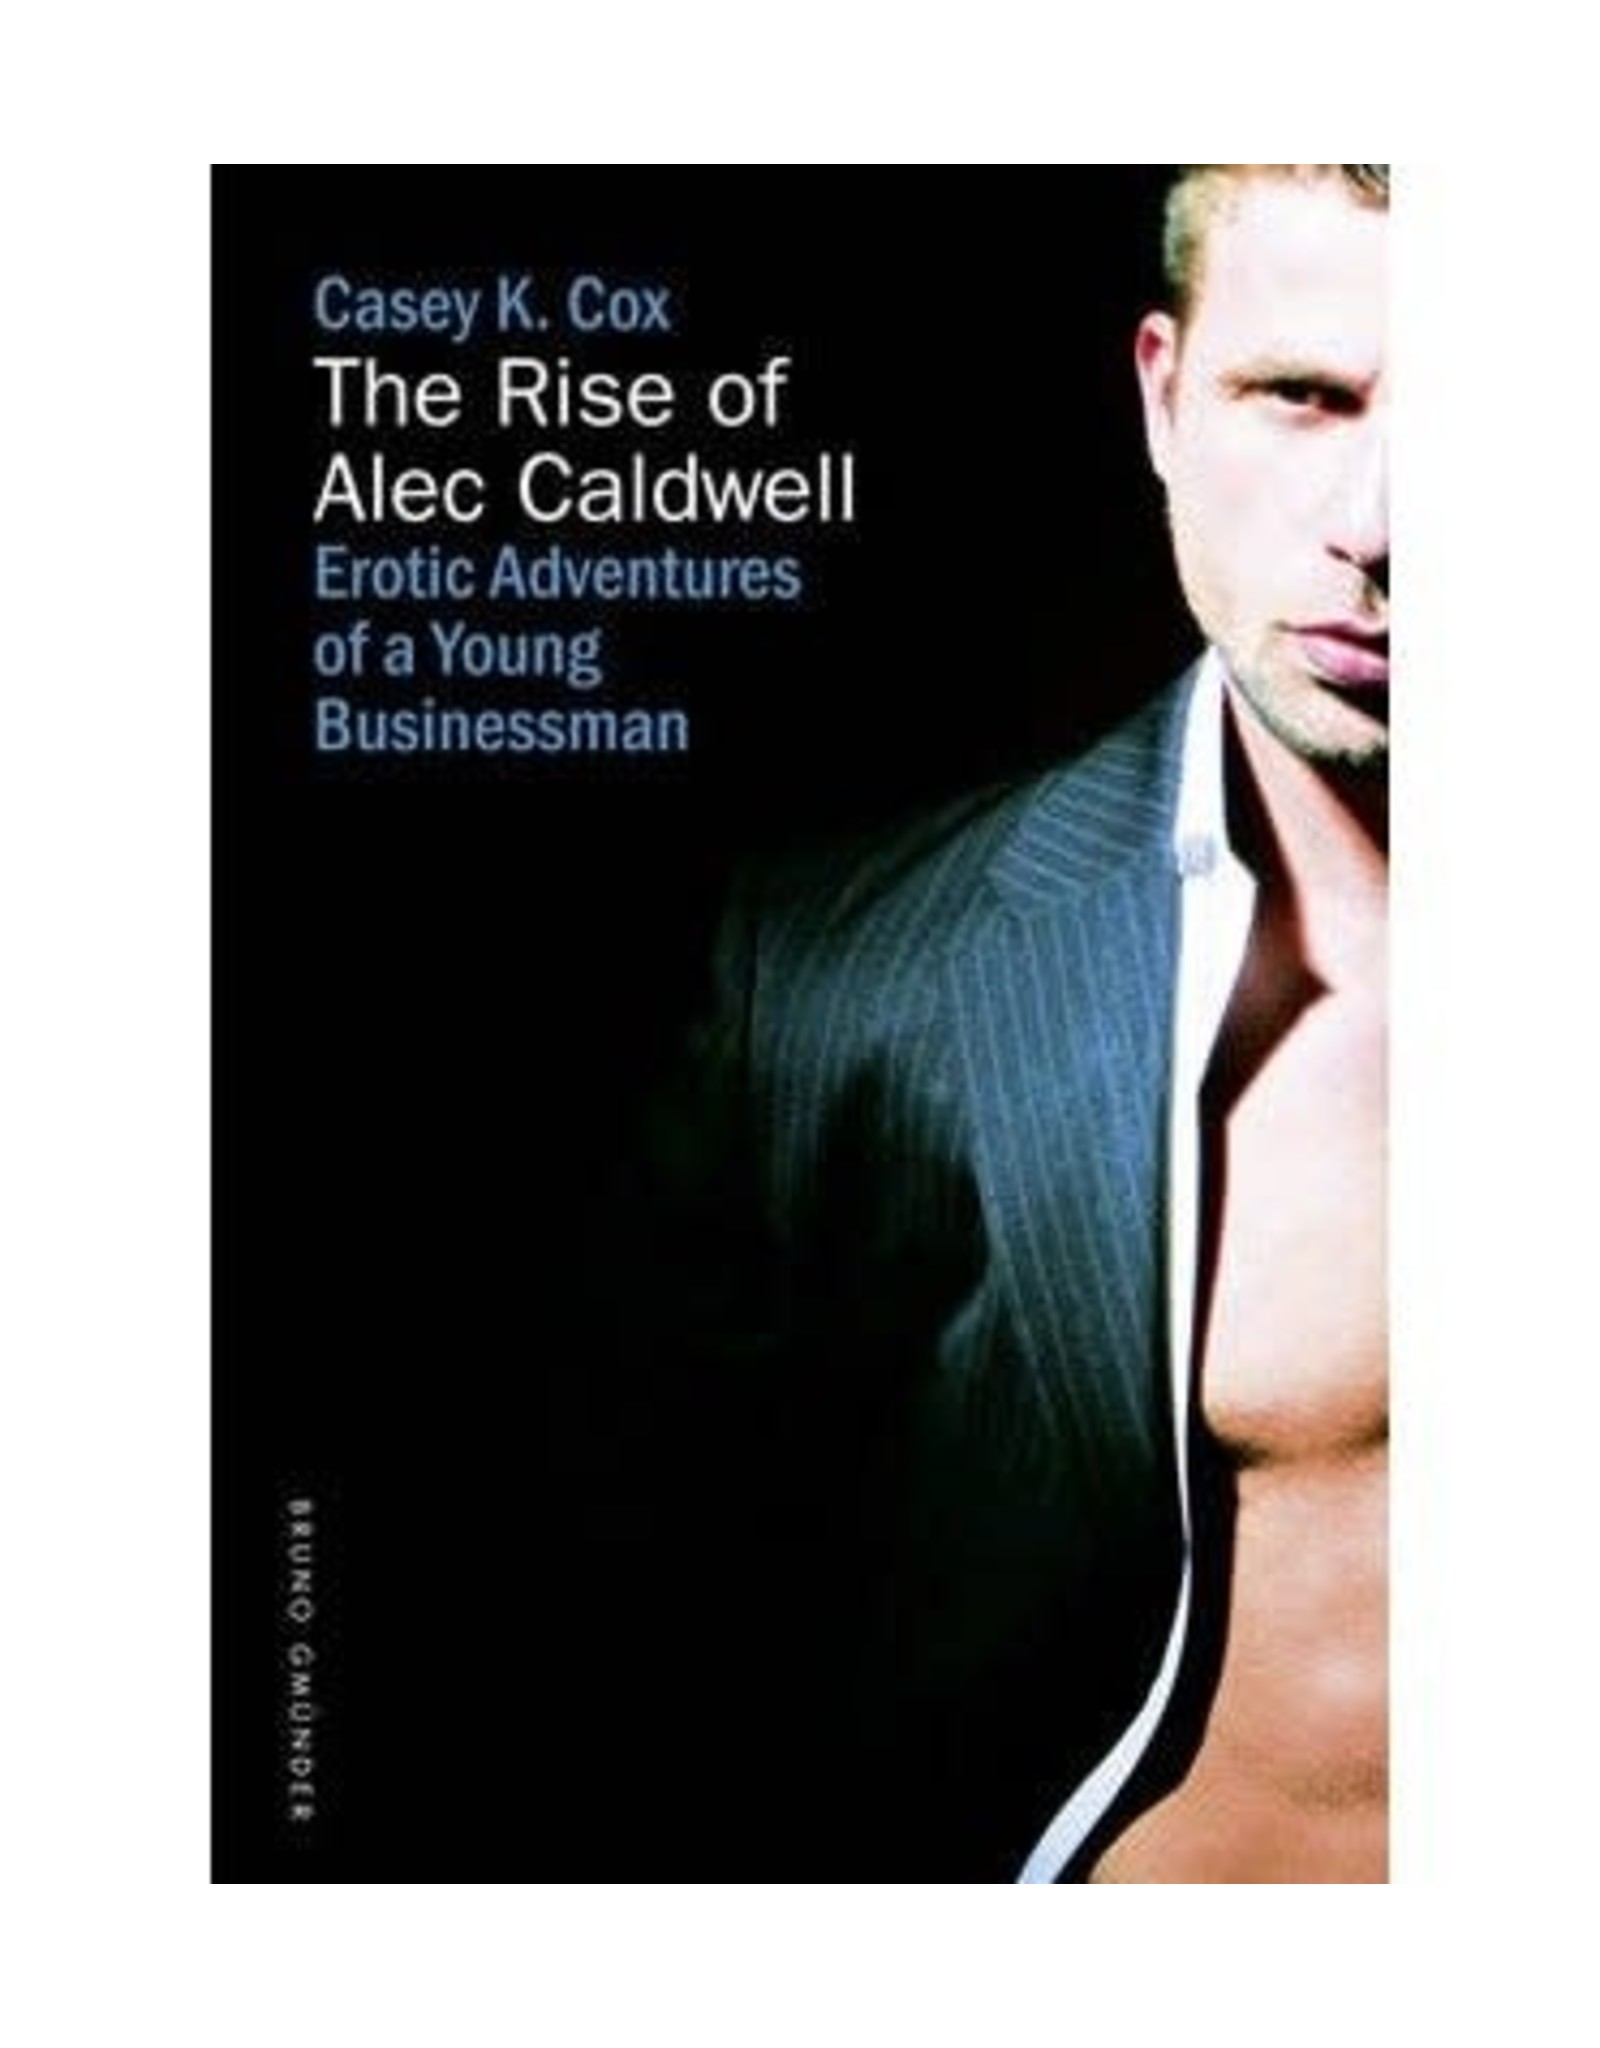 Nazca Plains Nazca Plains The Rise of Alec Caldwell (Erotic Adventures of a Young Businessman)